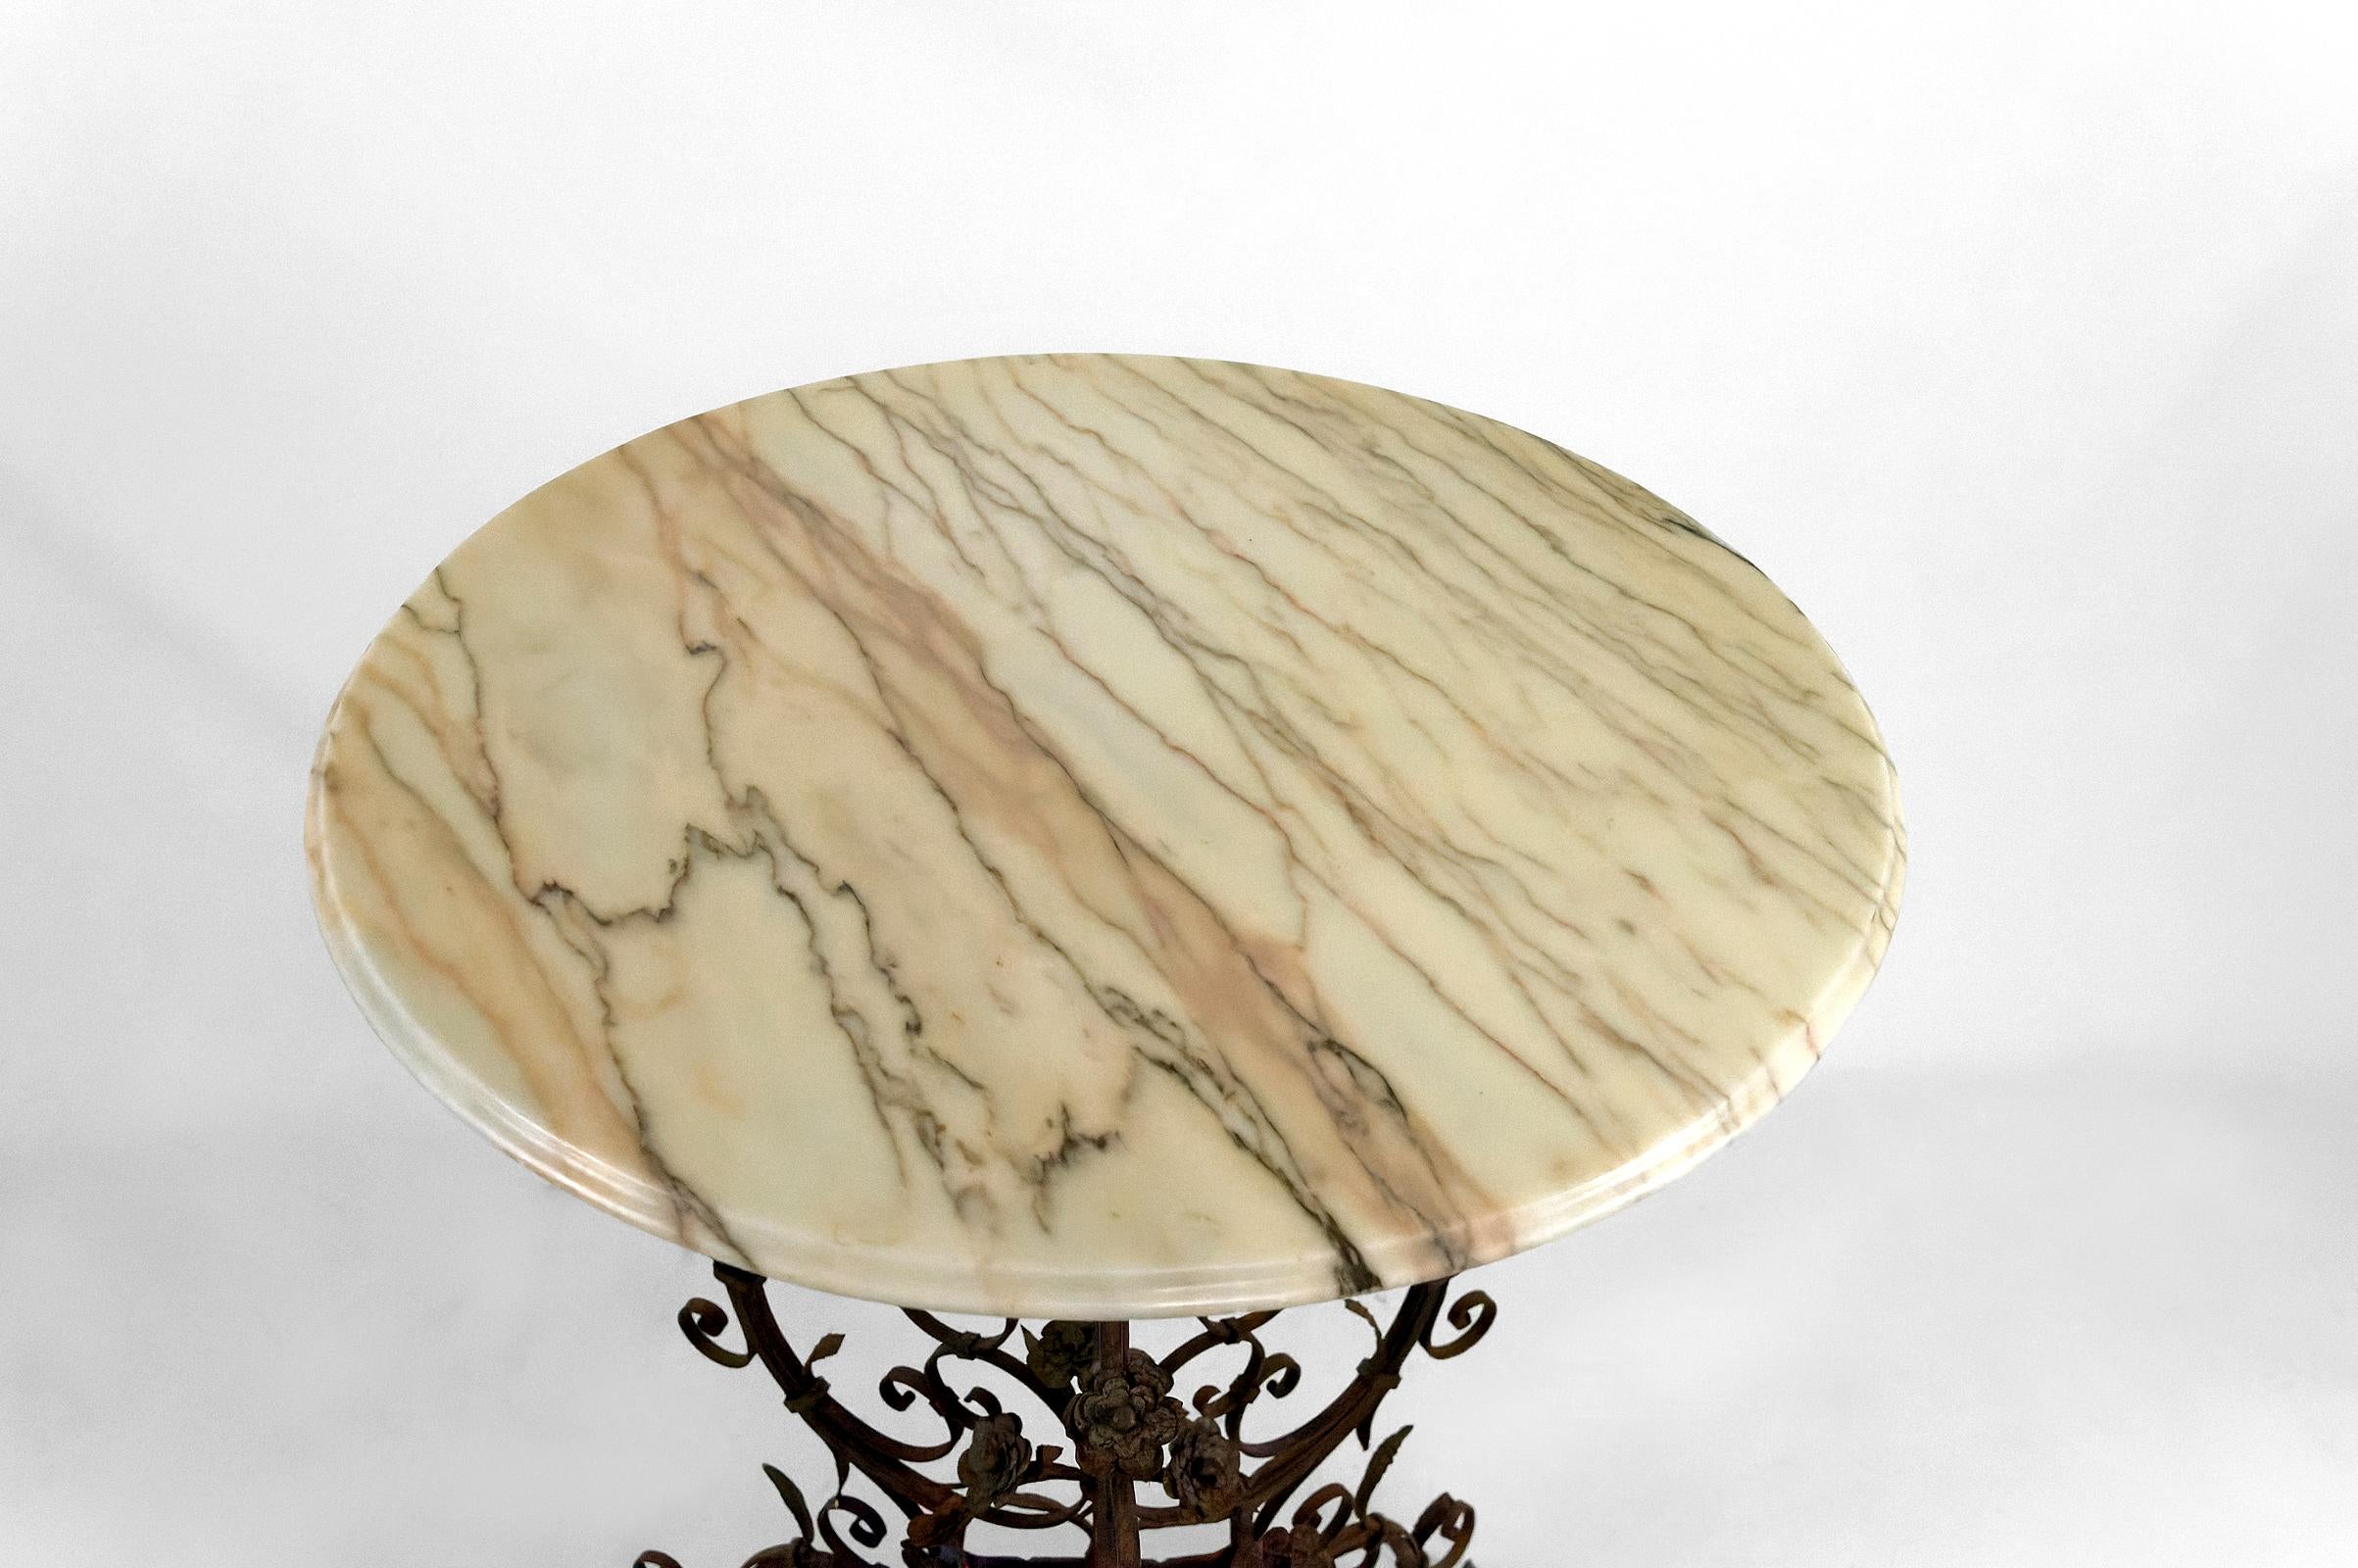 Patinated Wrought iron pedestal table / side table and marble top, Venice, Italy, 17th For Sale